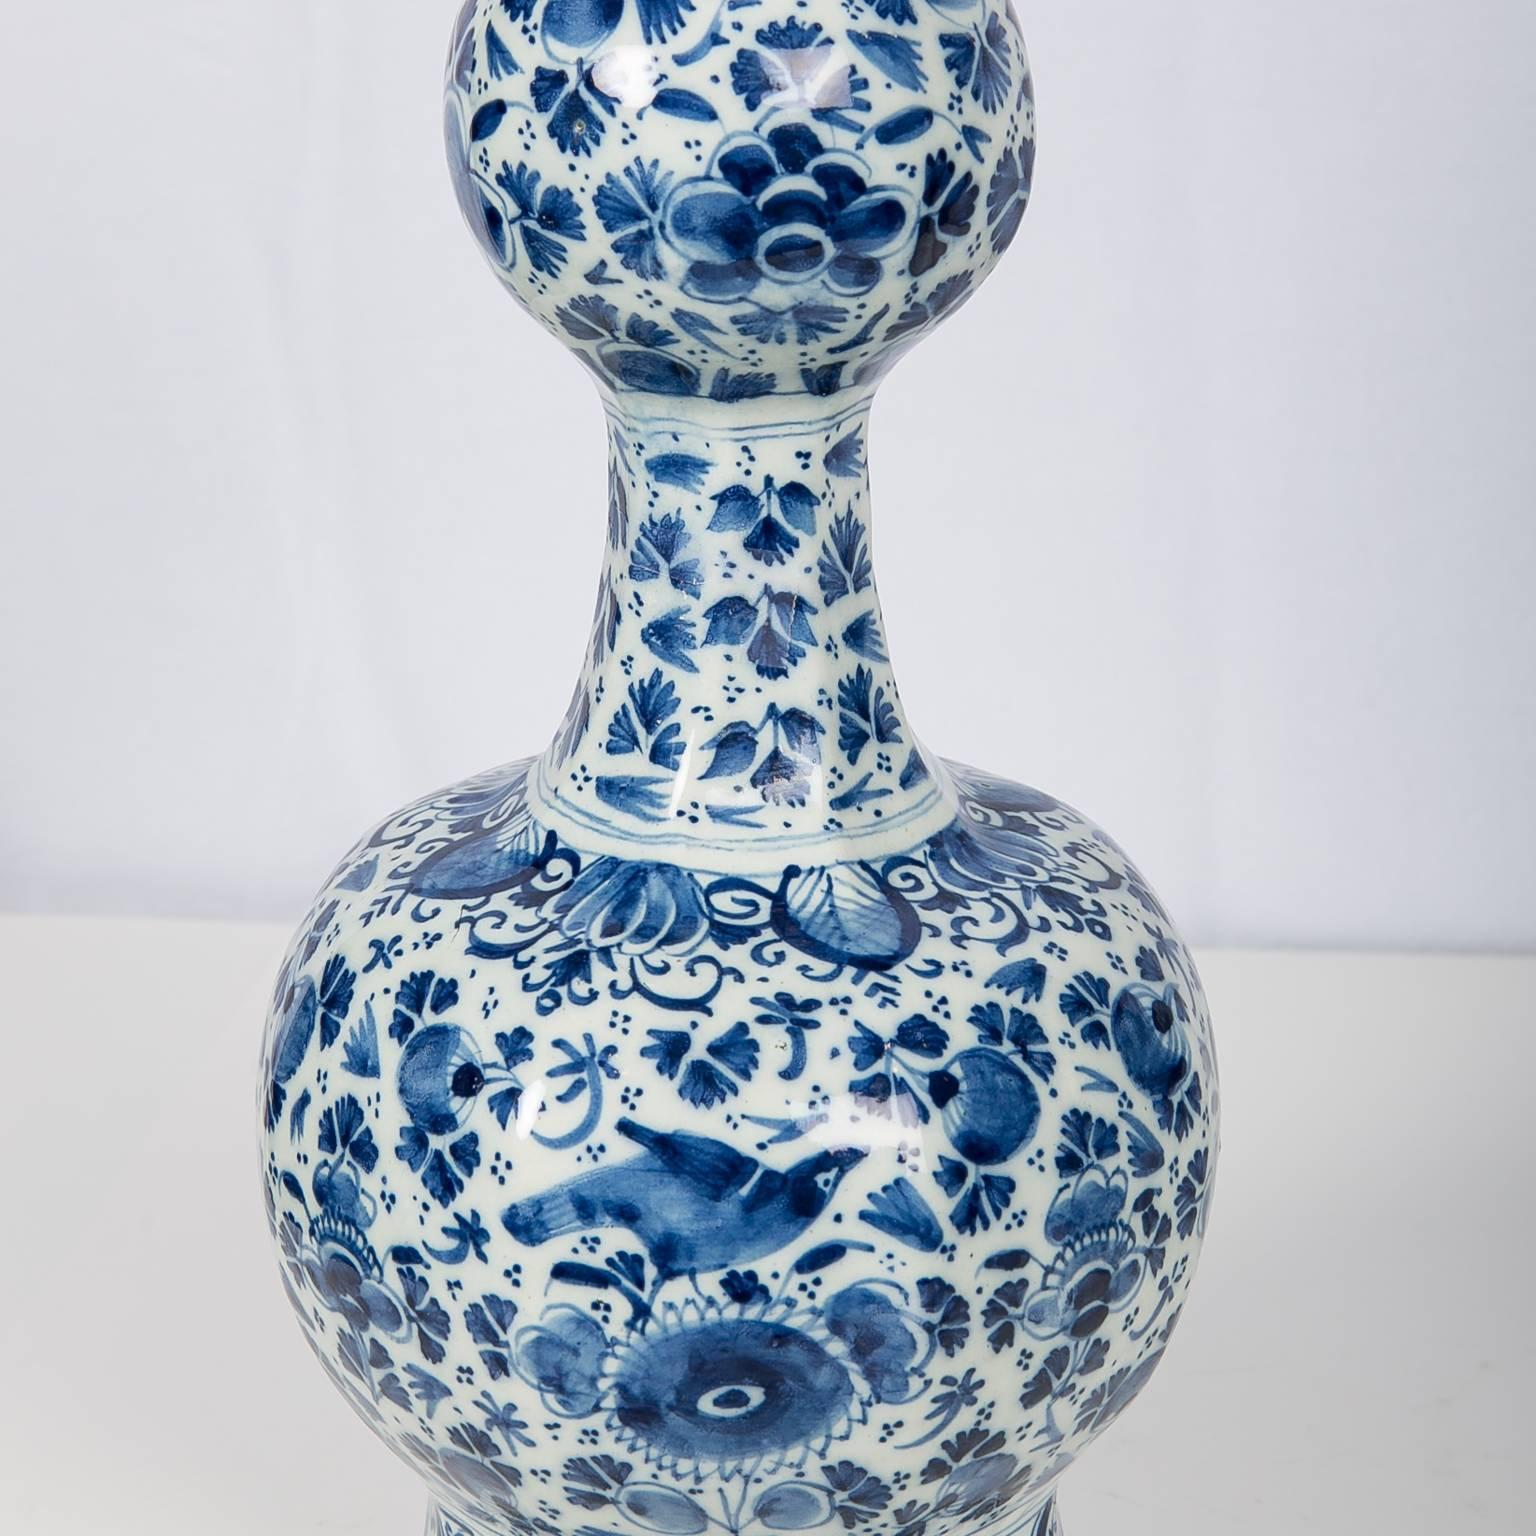 Late 18th Century Antique Blue and White Delft Vases Pair Hand-Painted   IN STOCK